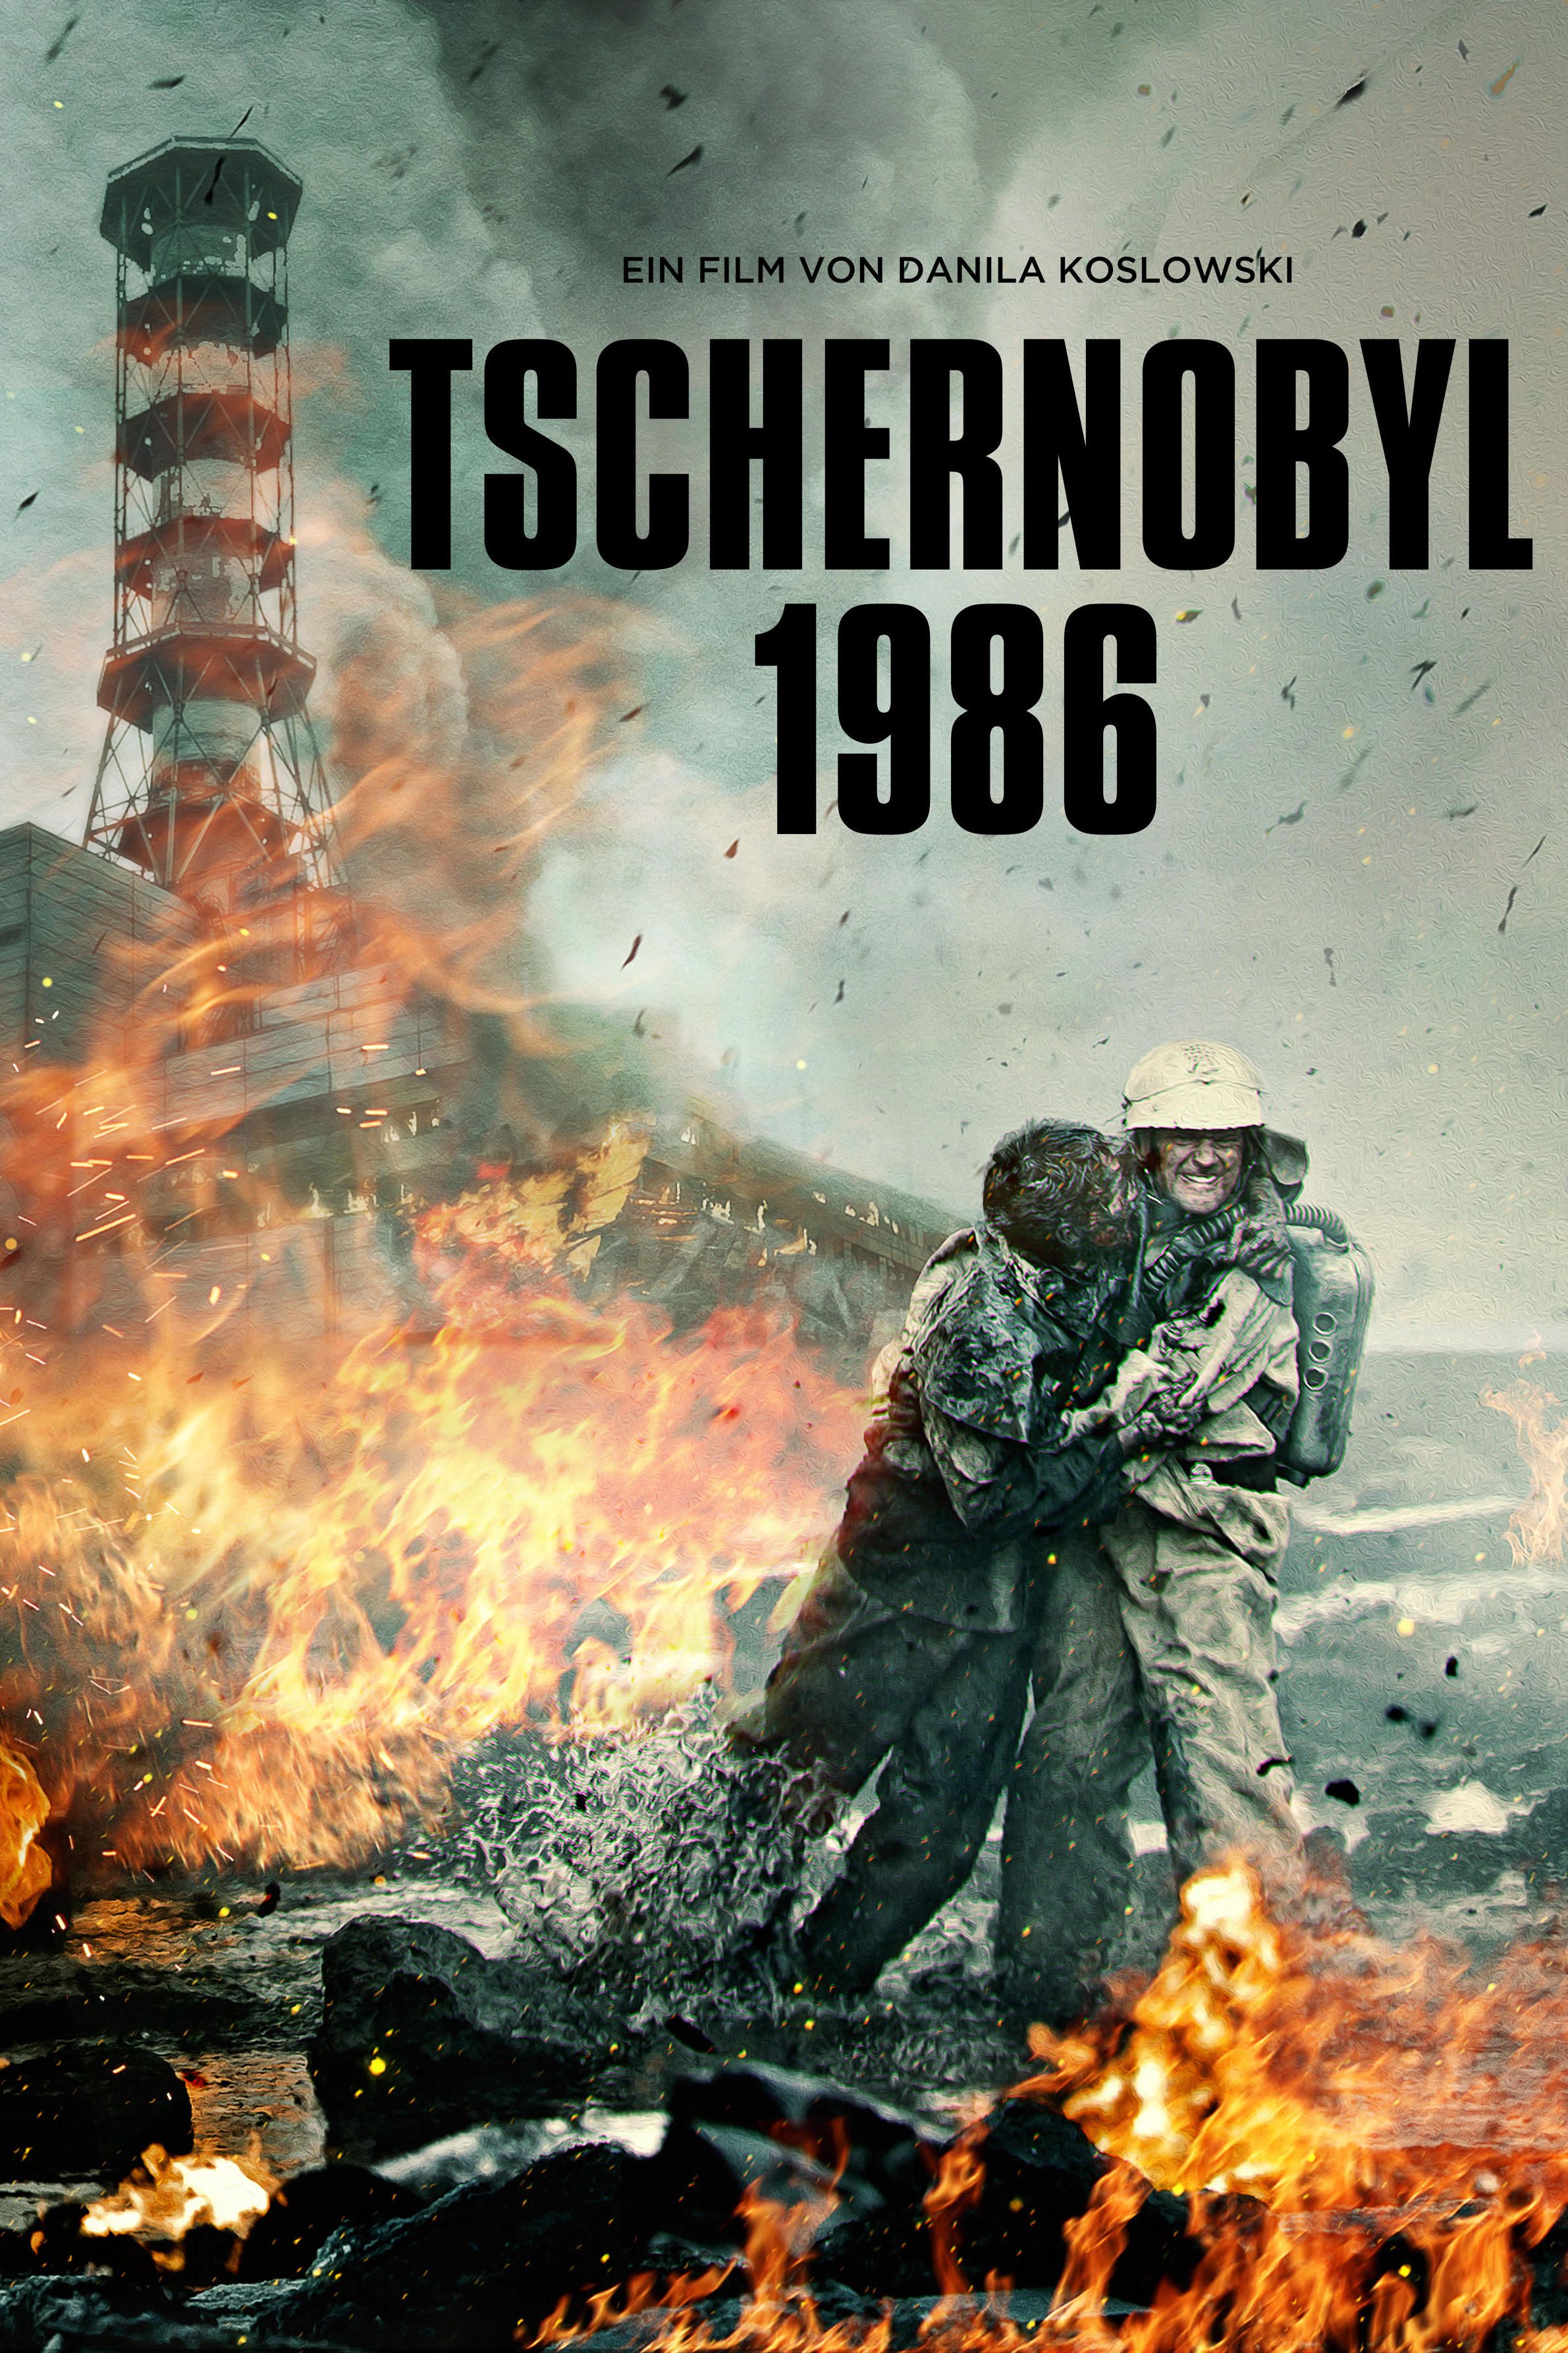 Chernobyl is everything they say it is. Watch it now - Hindustan Times